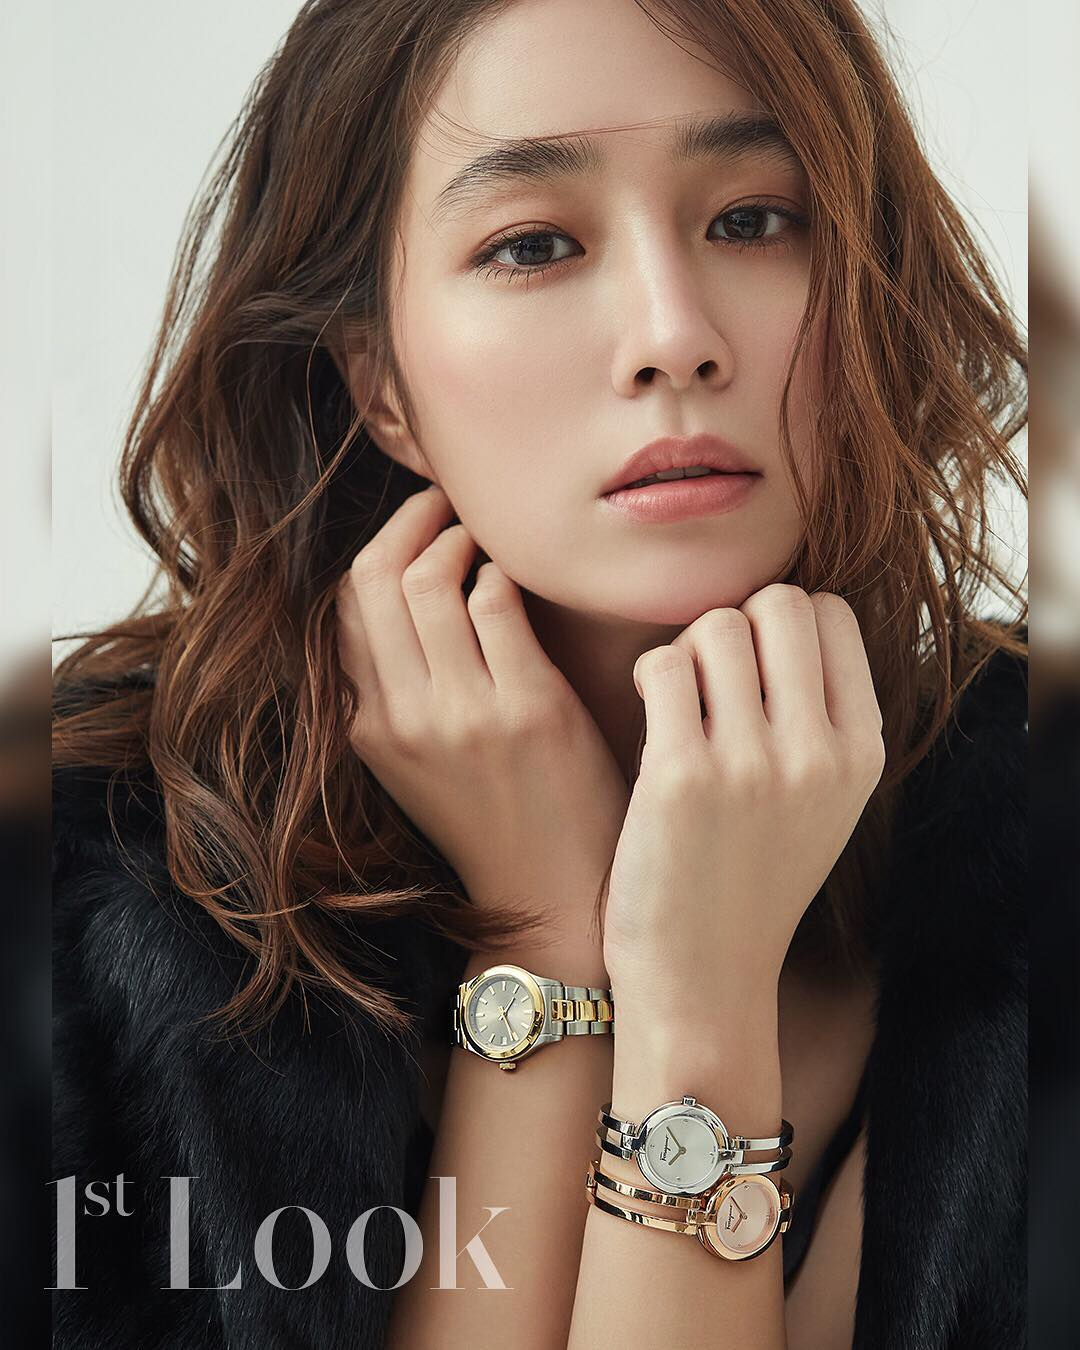 twenty2 blog: Lee Min Jung in 1st Look Vol. 167 | Fashion and Beauty